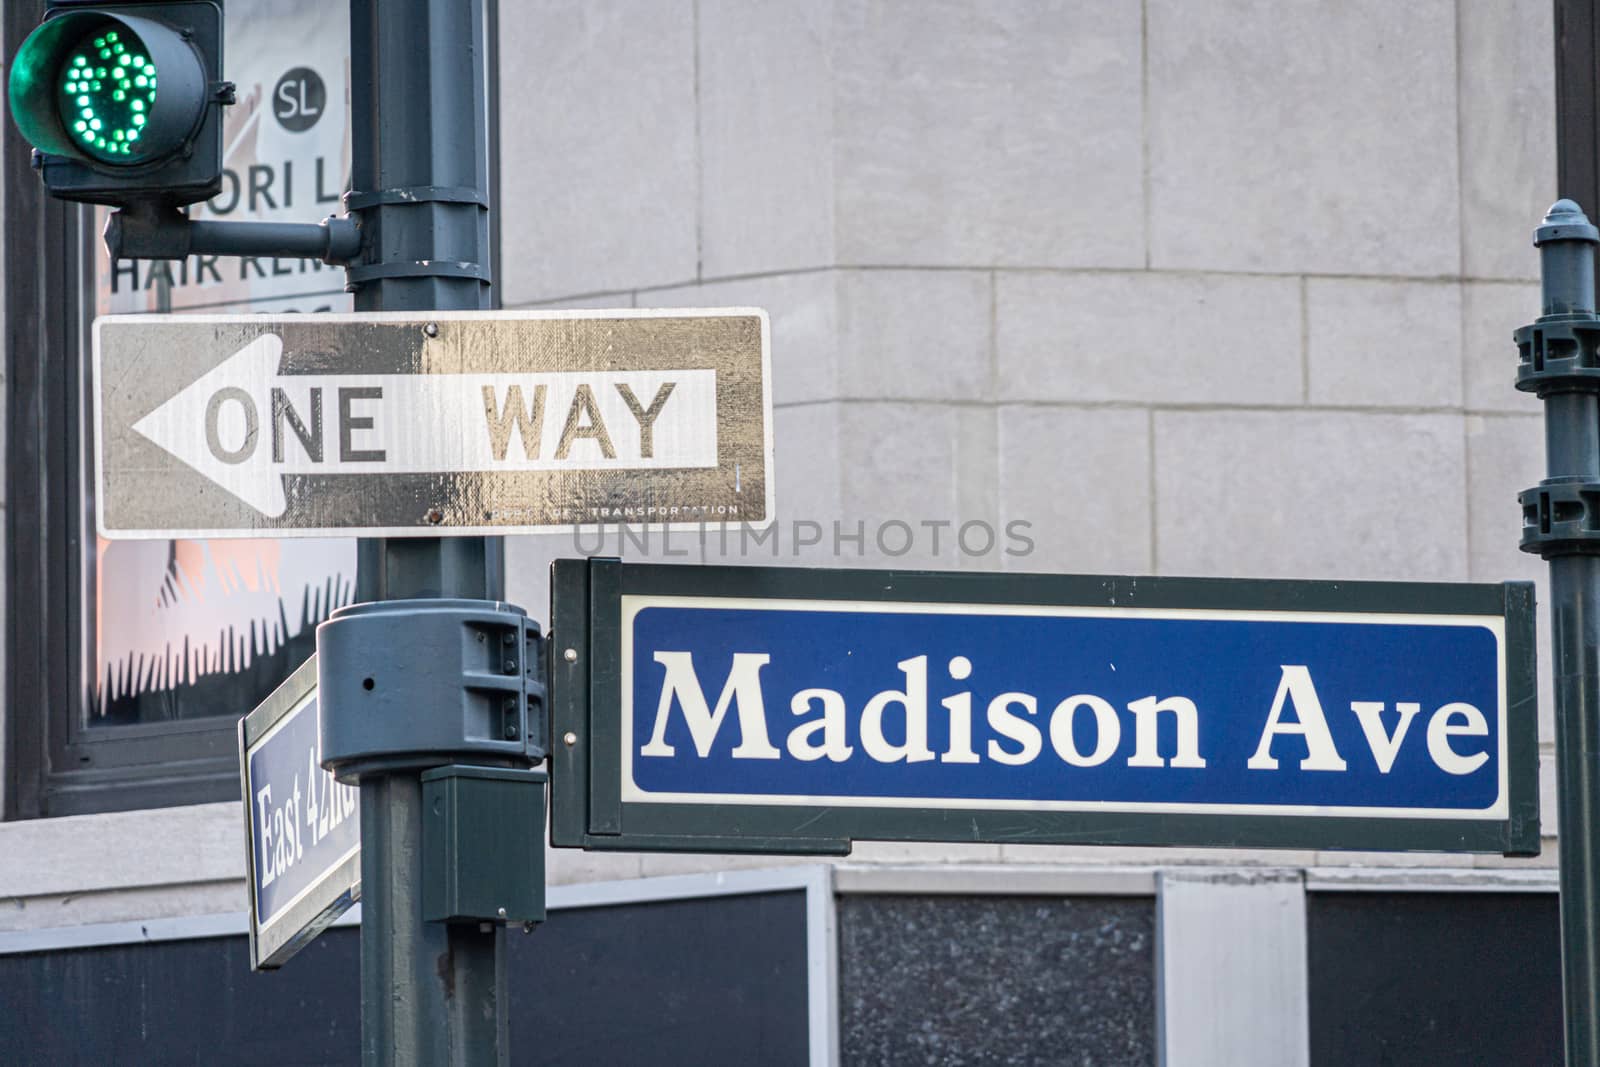 Madison Ave street sign in Midtown Manhattan by tanaonte